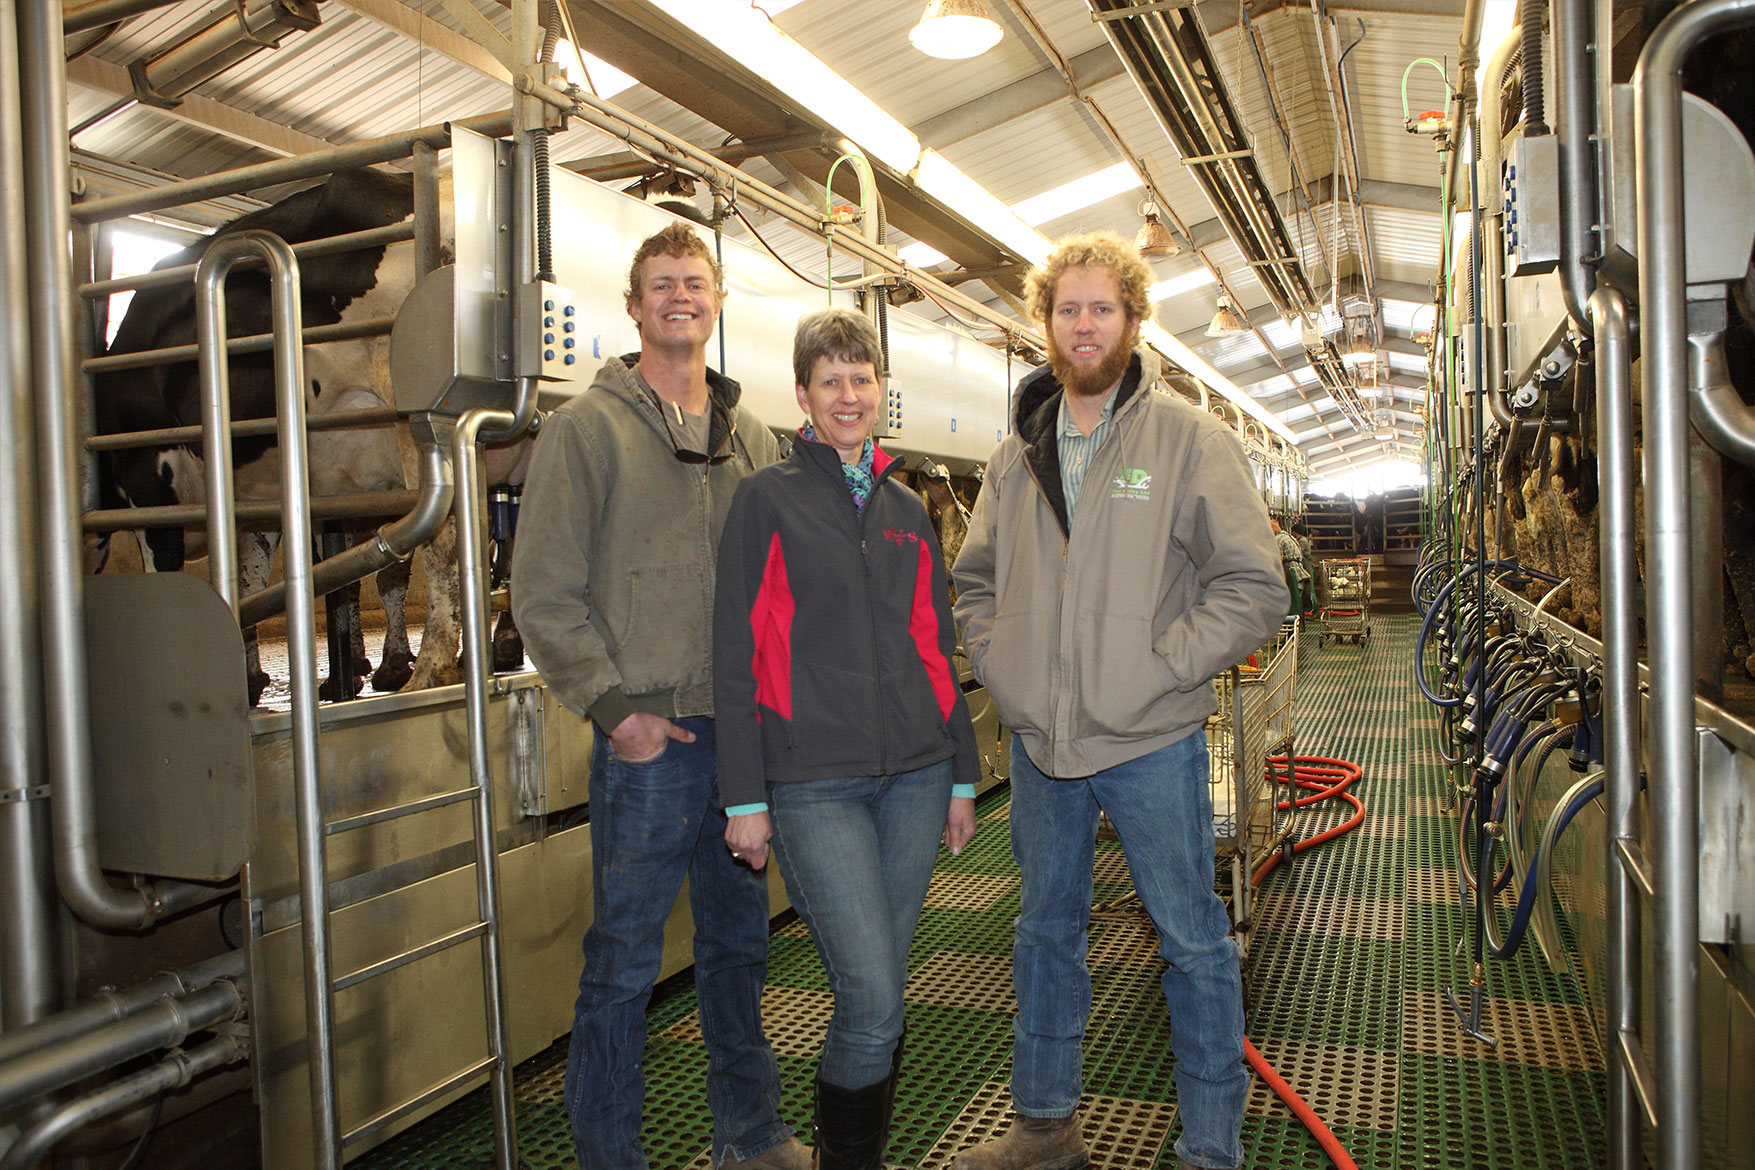 The DeVos family inside the milking parlor at Fox Dairy.